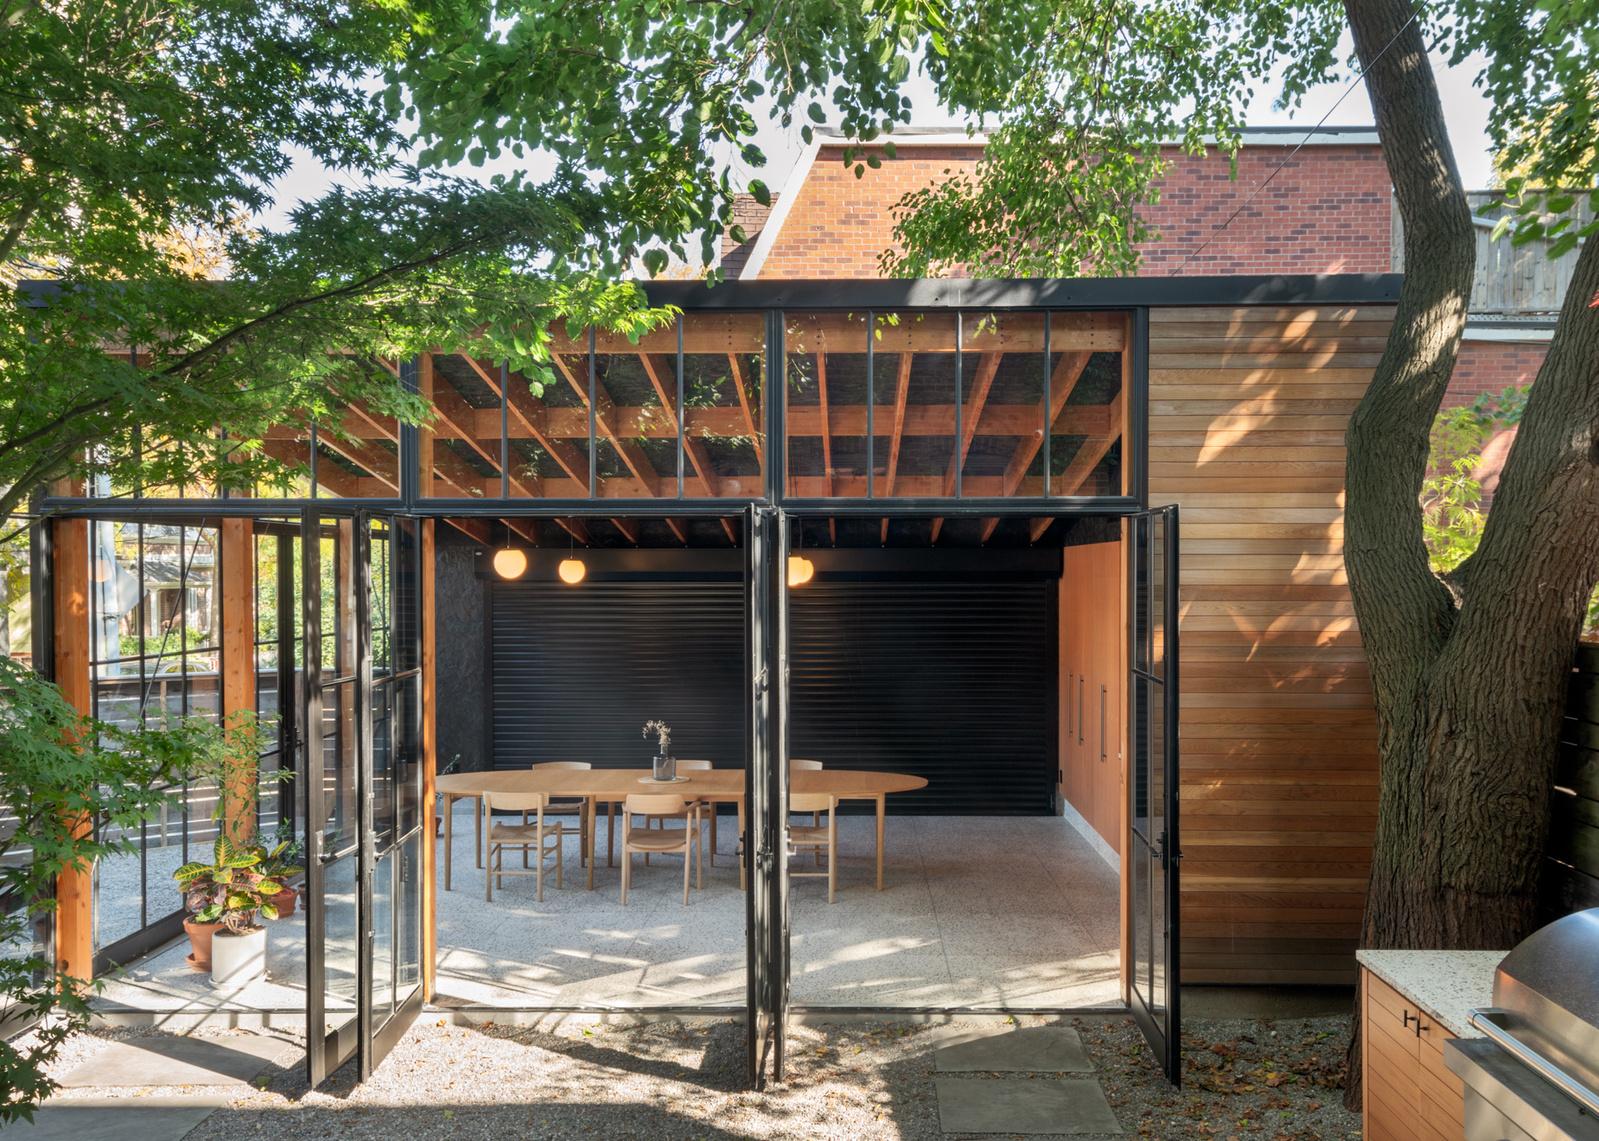 This  small structure re-imagines the detached laneway garage, (often an under-utilized storage space), and makes it into a true extension of the home. The 'Garage Gem' strikes a balance between precious and utilitarian to support a wide range of 